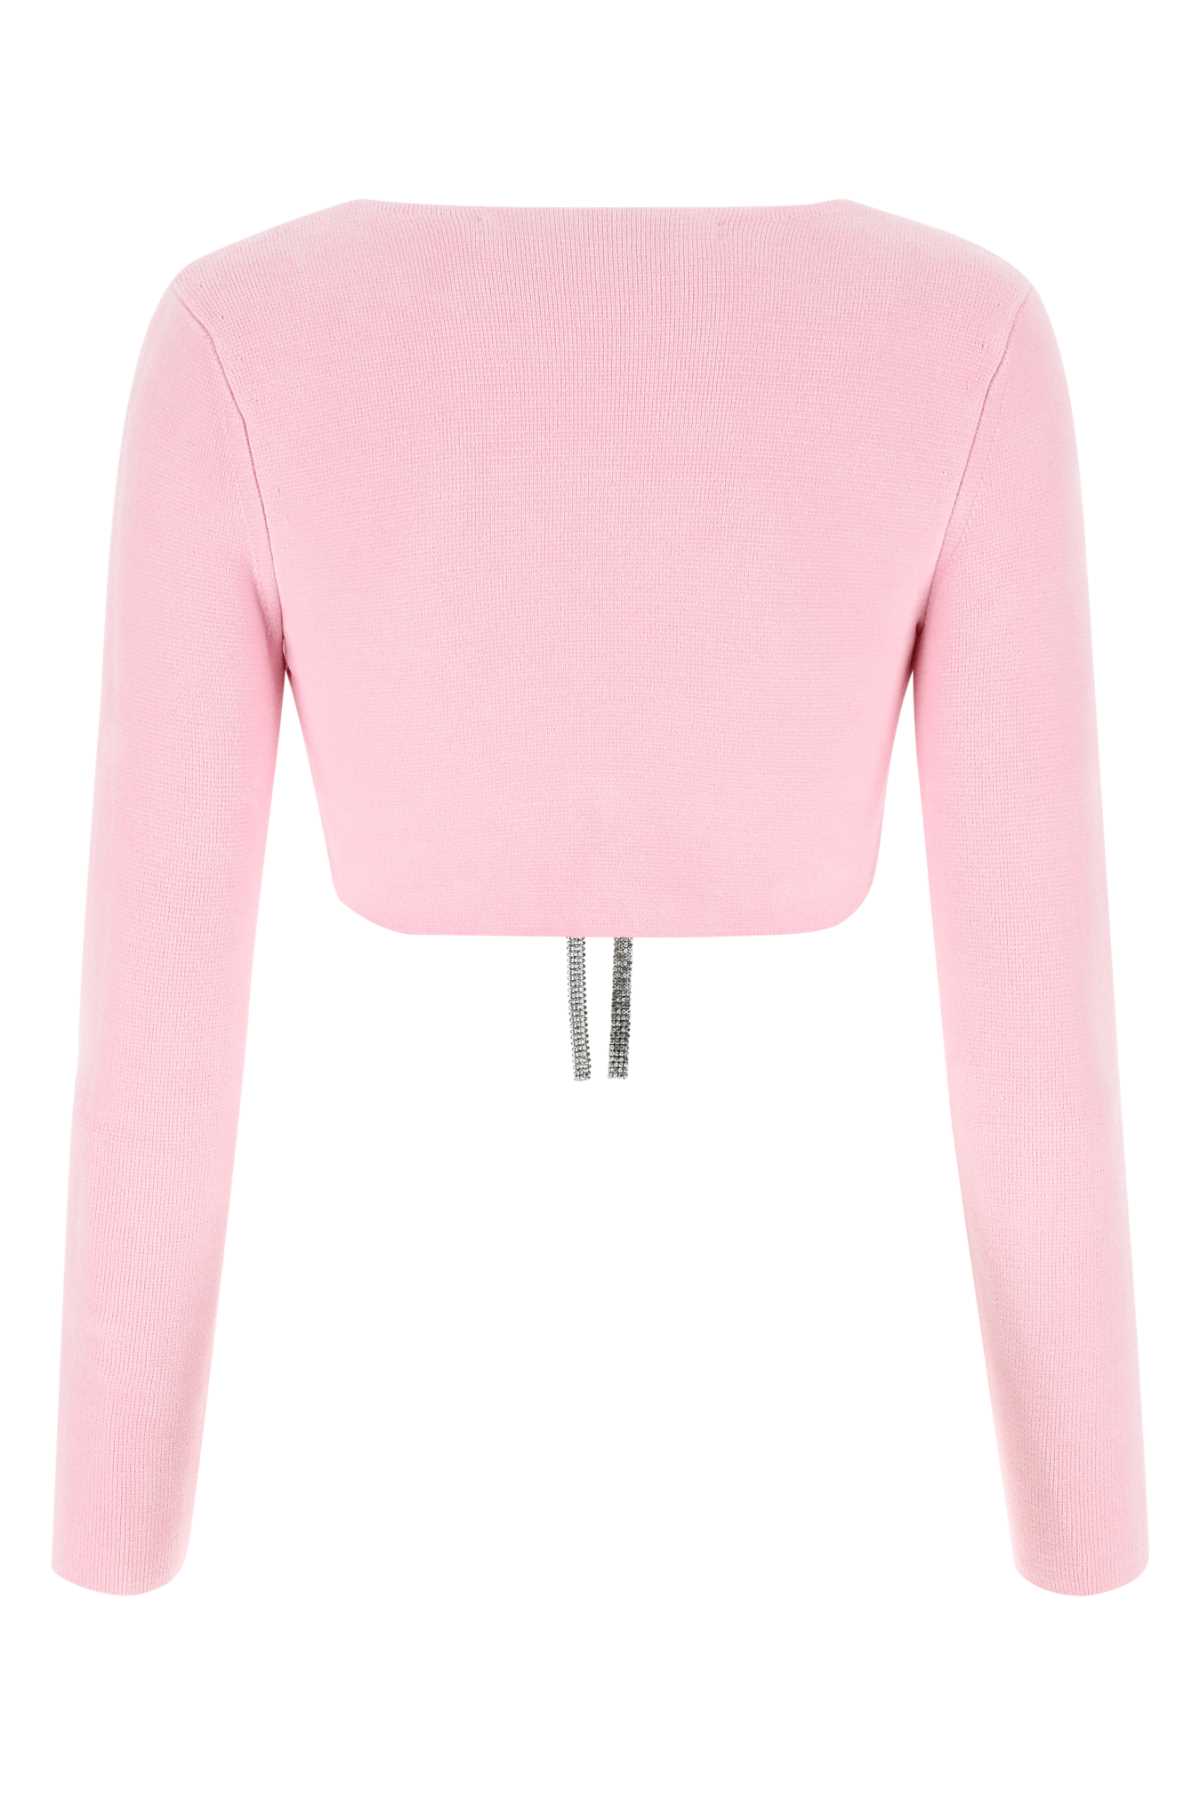 Alexander Wang Pink Stretch Cotton Blend Wrap-over Cardigan In 950